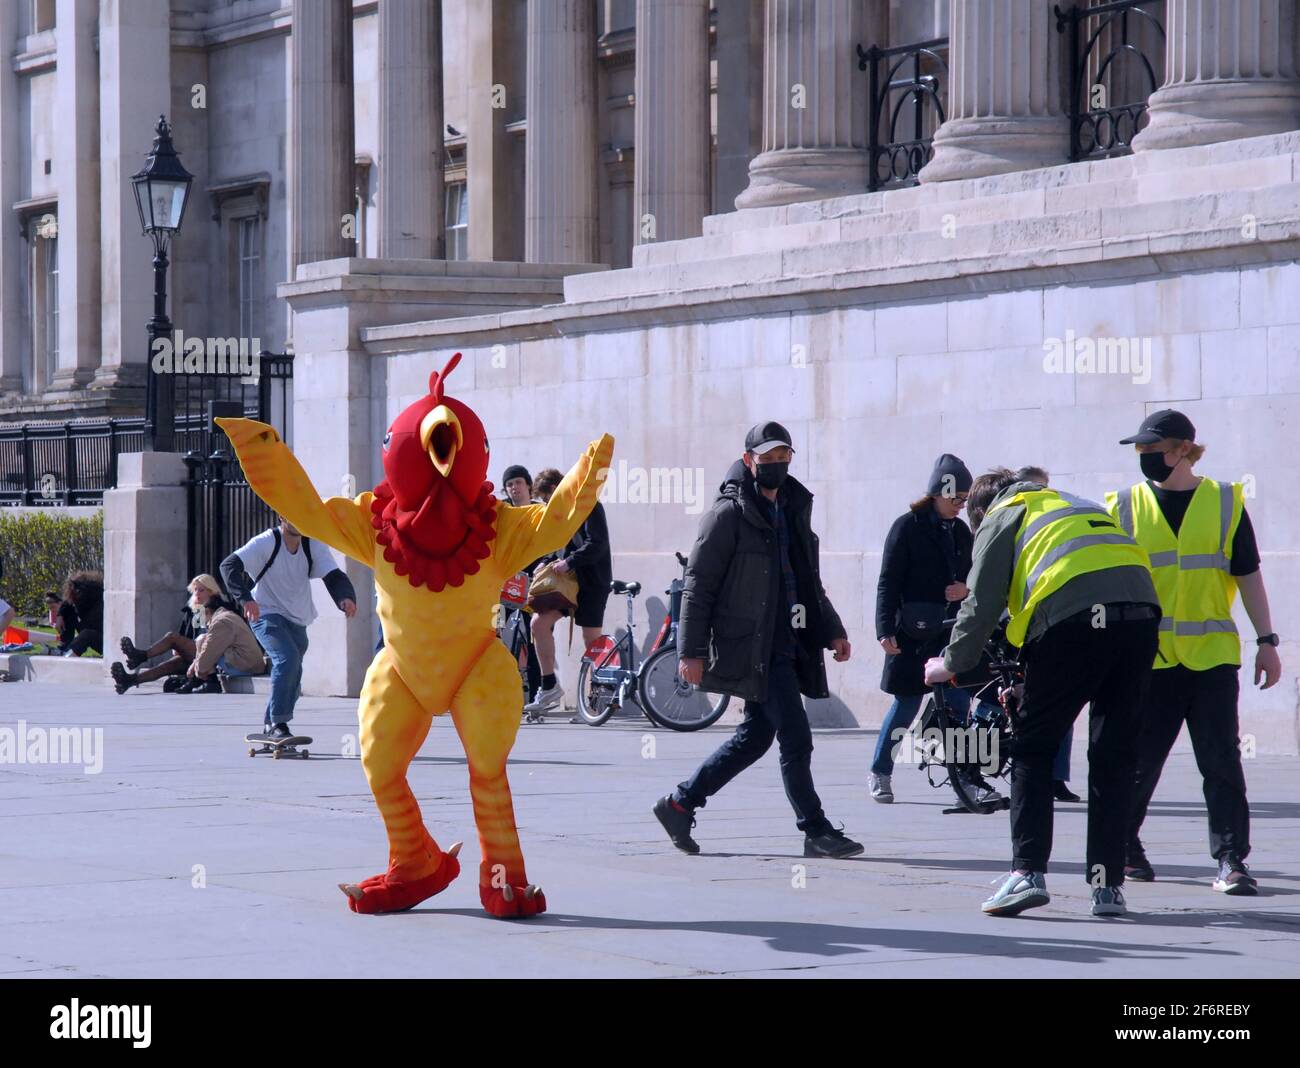 London, UK, 2 April 2021 People enjoy sunshine in Trafalgar Square in the West End on Good Friday as coronavirus lockdown restrictions begin to be lifted.  Credit: JOHNNY ARMSTEAD/Alamy Live News Stock Photo